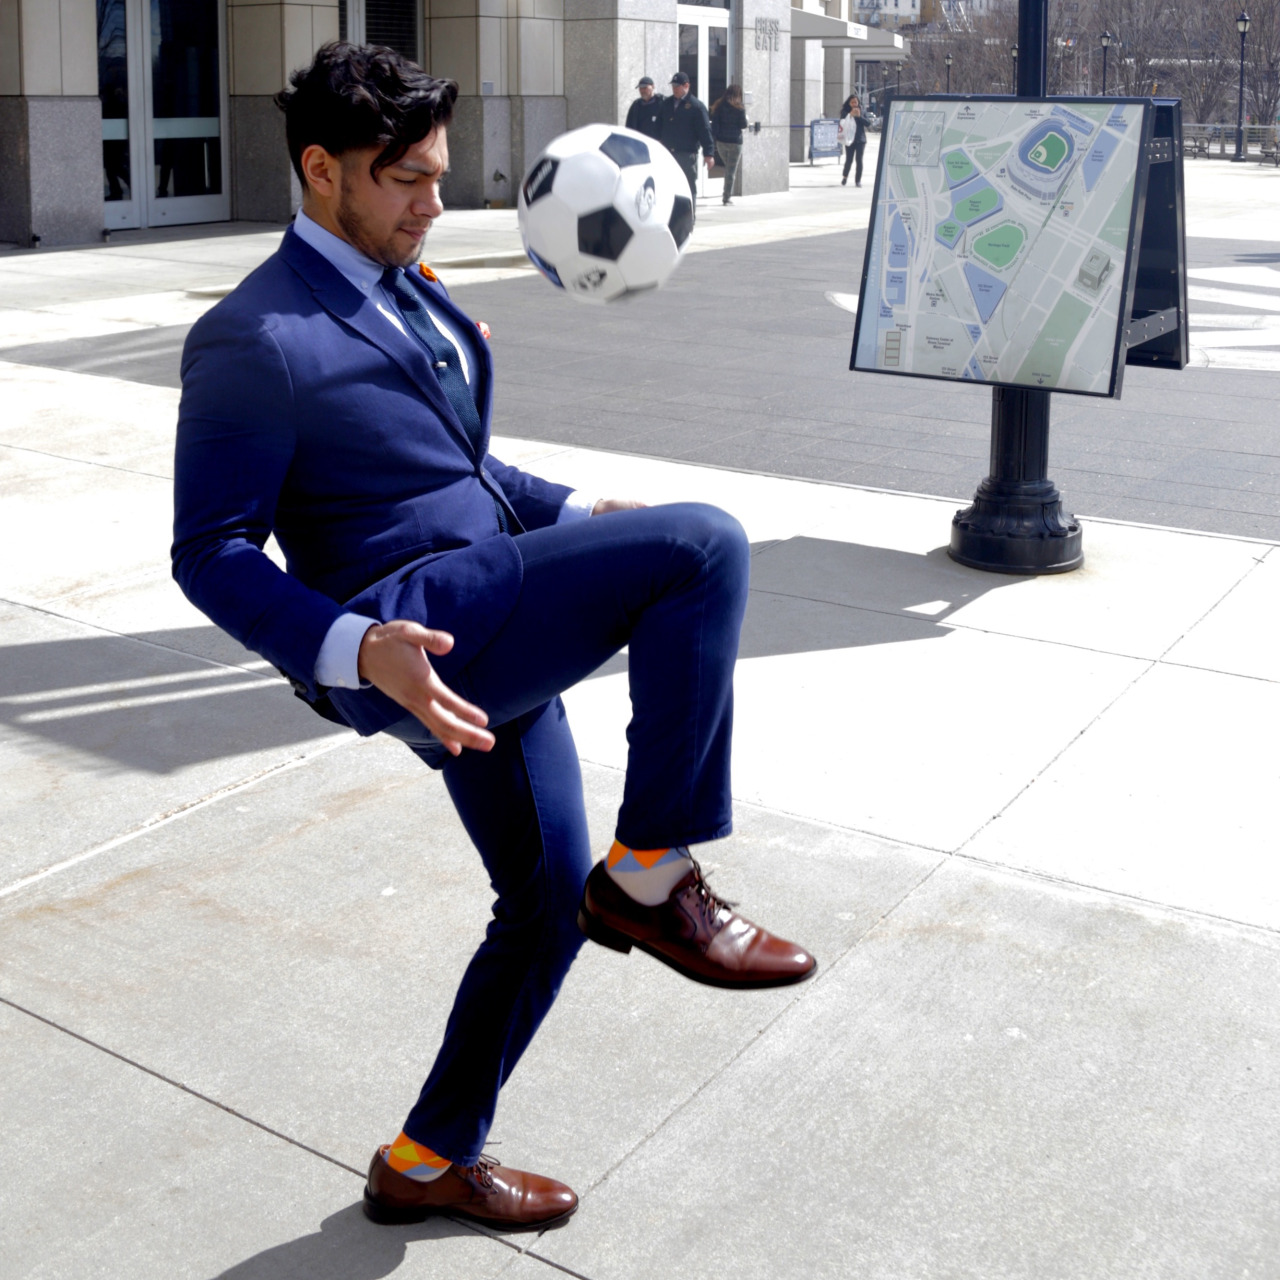 menswear suit inspired by nycfc navy suit - dandy in the bronx playing soccer in a suit